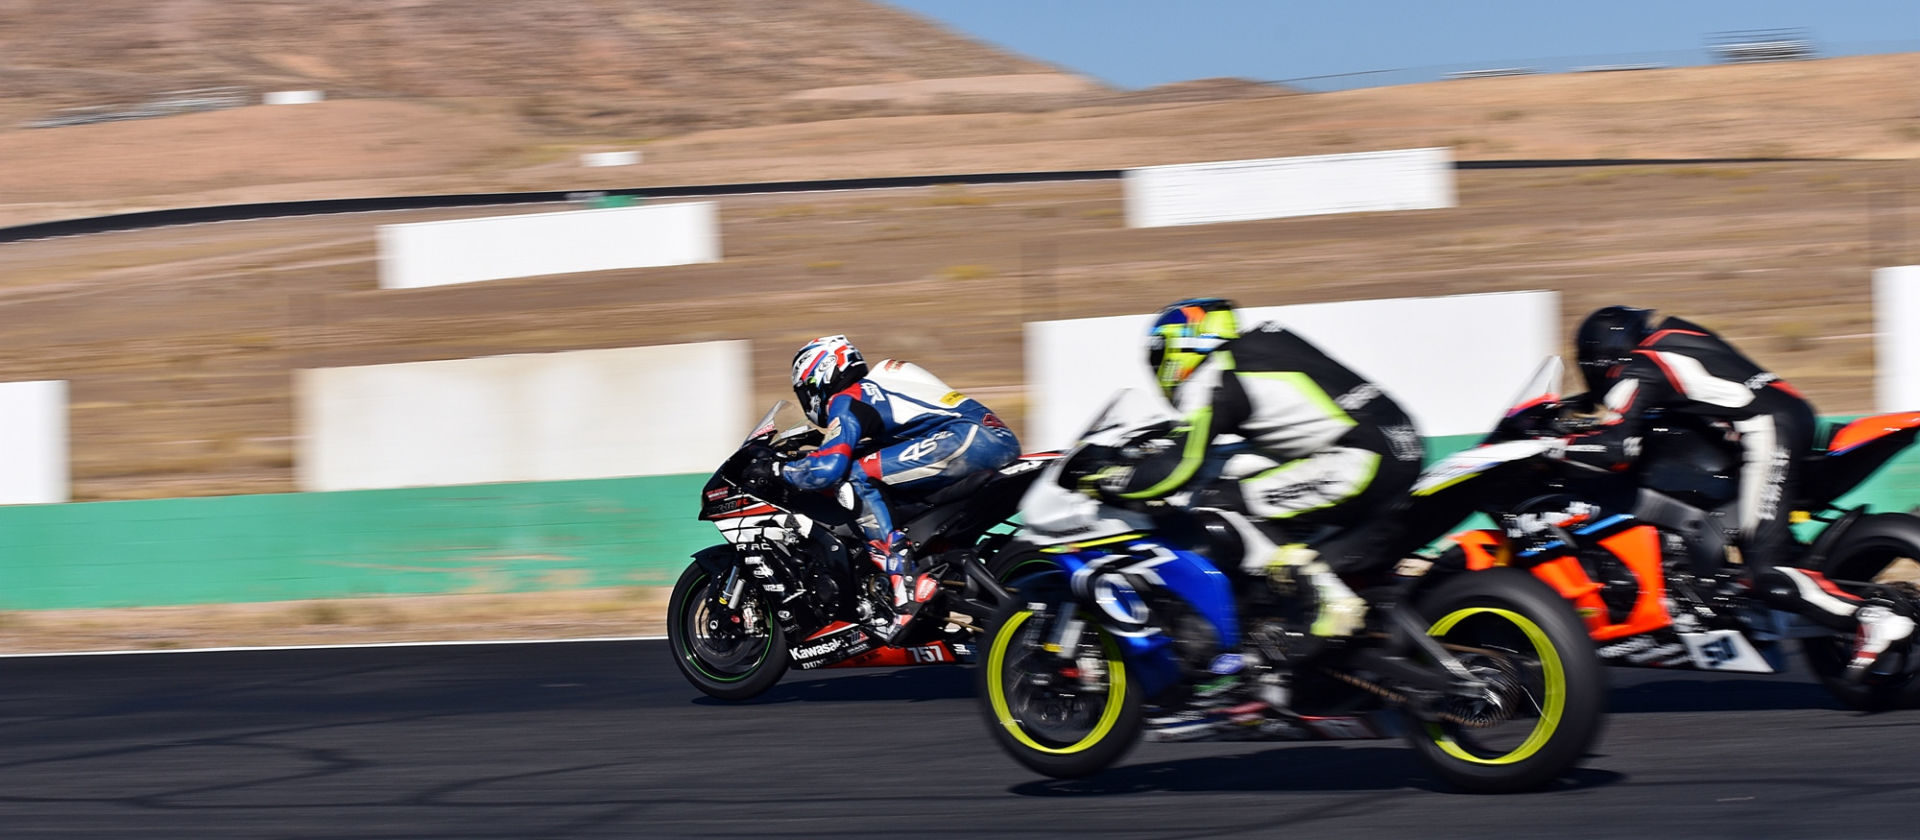 A WERA West race start at Willow Spring International Raceway in 2019. Photo by Michael Gougis.